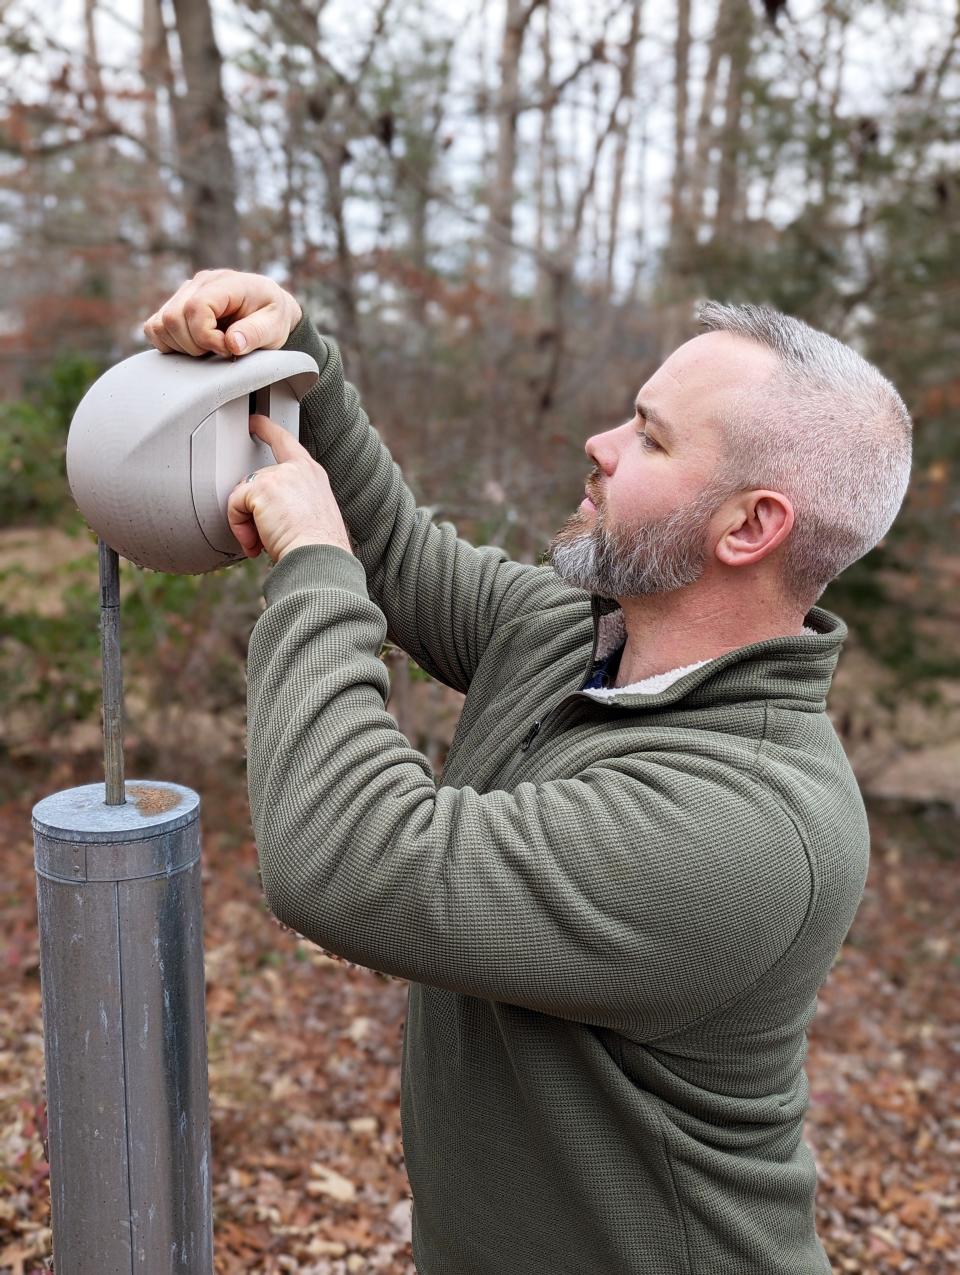 The Oak Ridge Bird Man Luke Coe-Starr inspects the Borbhouse, a bird nest box he designed and 3D-printed. In the background are crows in the woods.